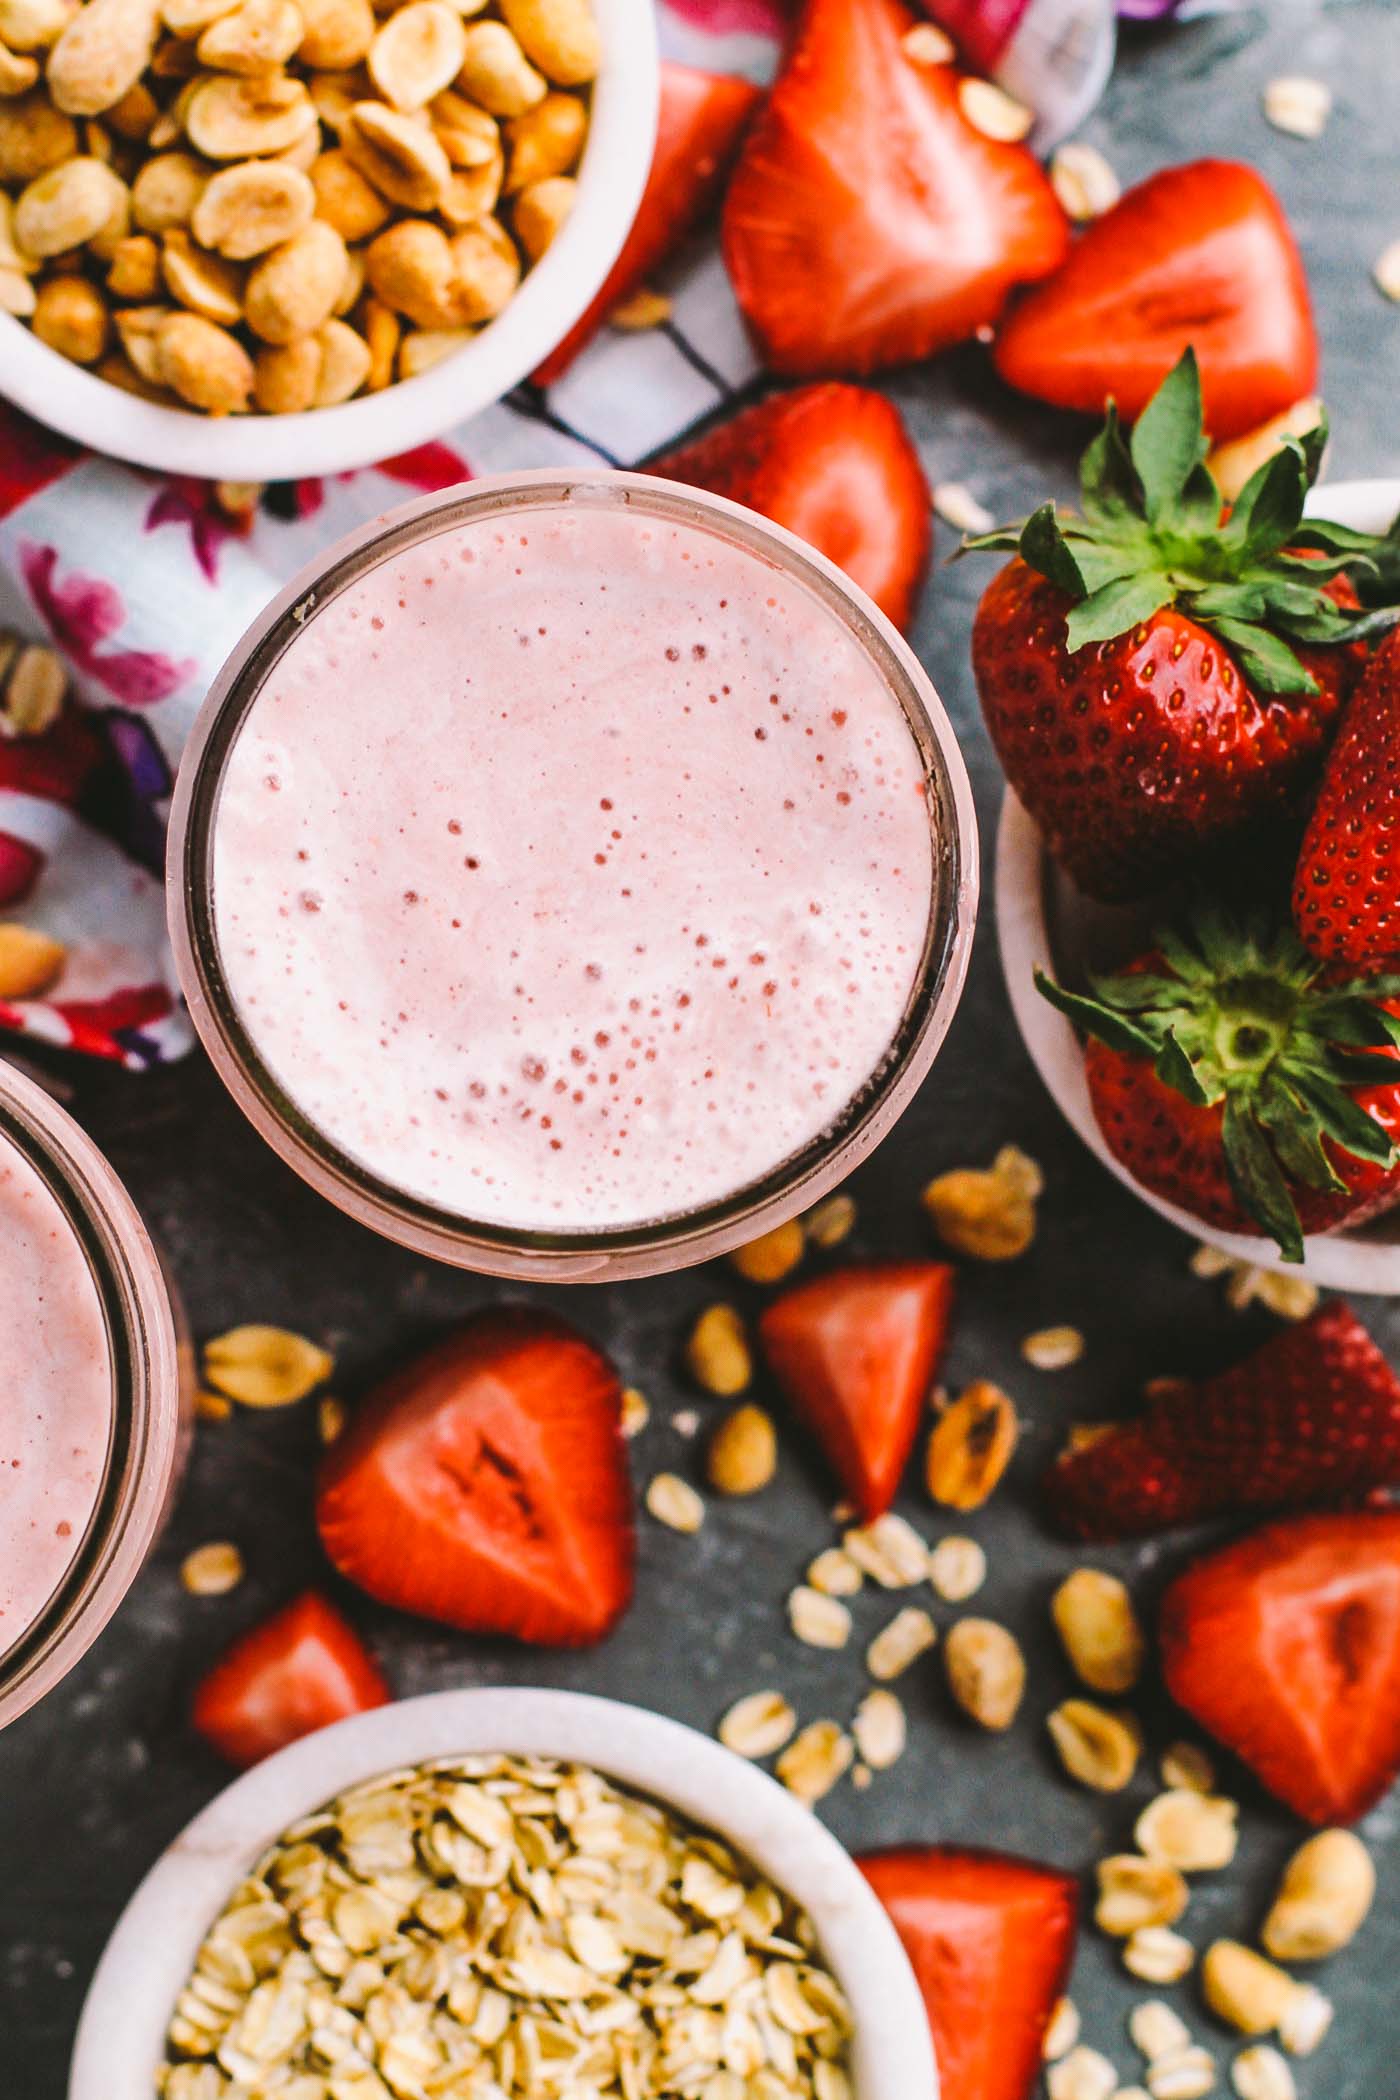 a creamy, delicious smoothie recipe for an easy, healthy breakfast for any busy weekday mornings! these peanut butter & jelly strawberry smoothies are loaded with strawberries, peanut butter, & oats to keep you full until lunchtime. | smoothie, healthy smoothie, protein shake, healthy breakfast, smoothie pack, gluten free, vegan, iifym |